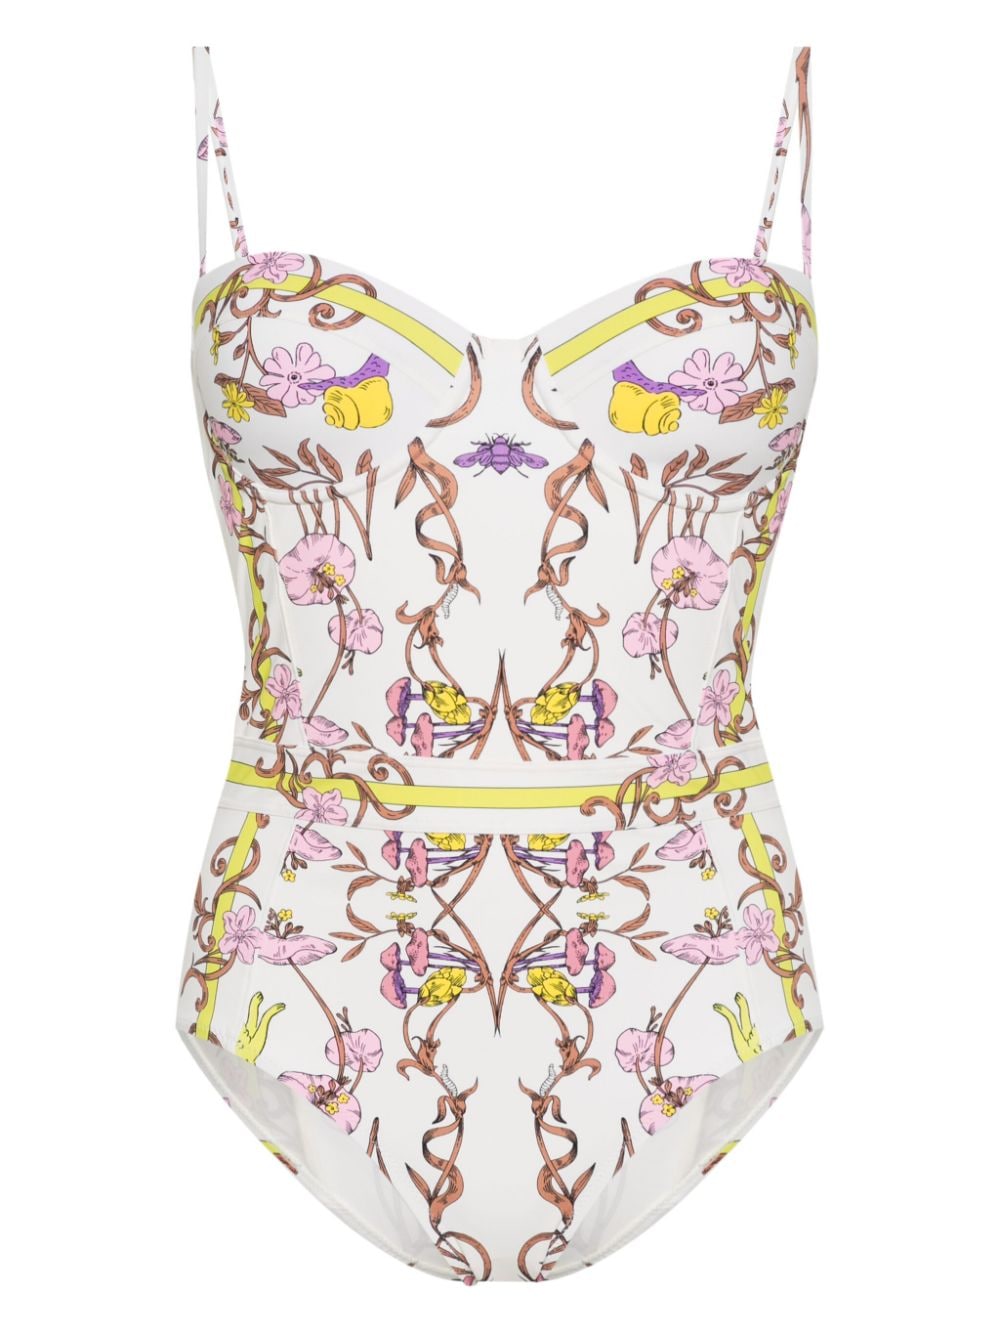 TORY BURCH GRAPHIC-PRINT SWIMSUIT